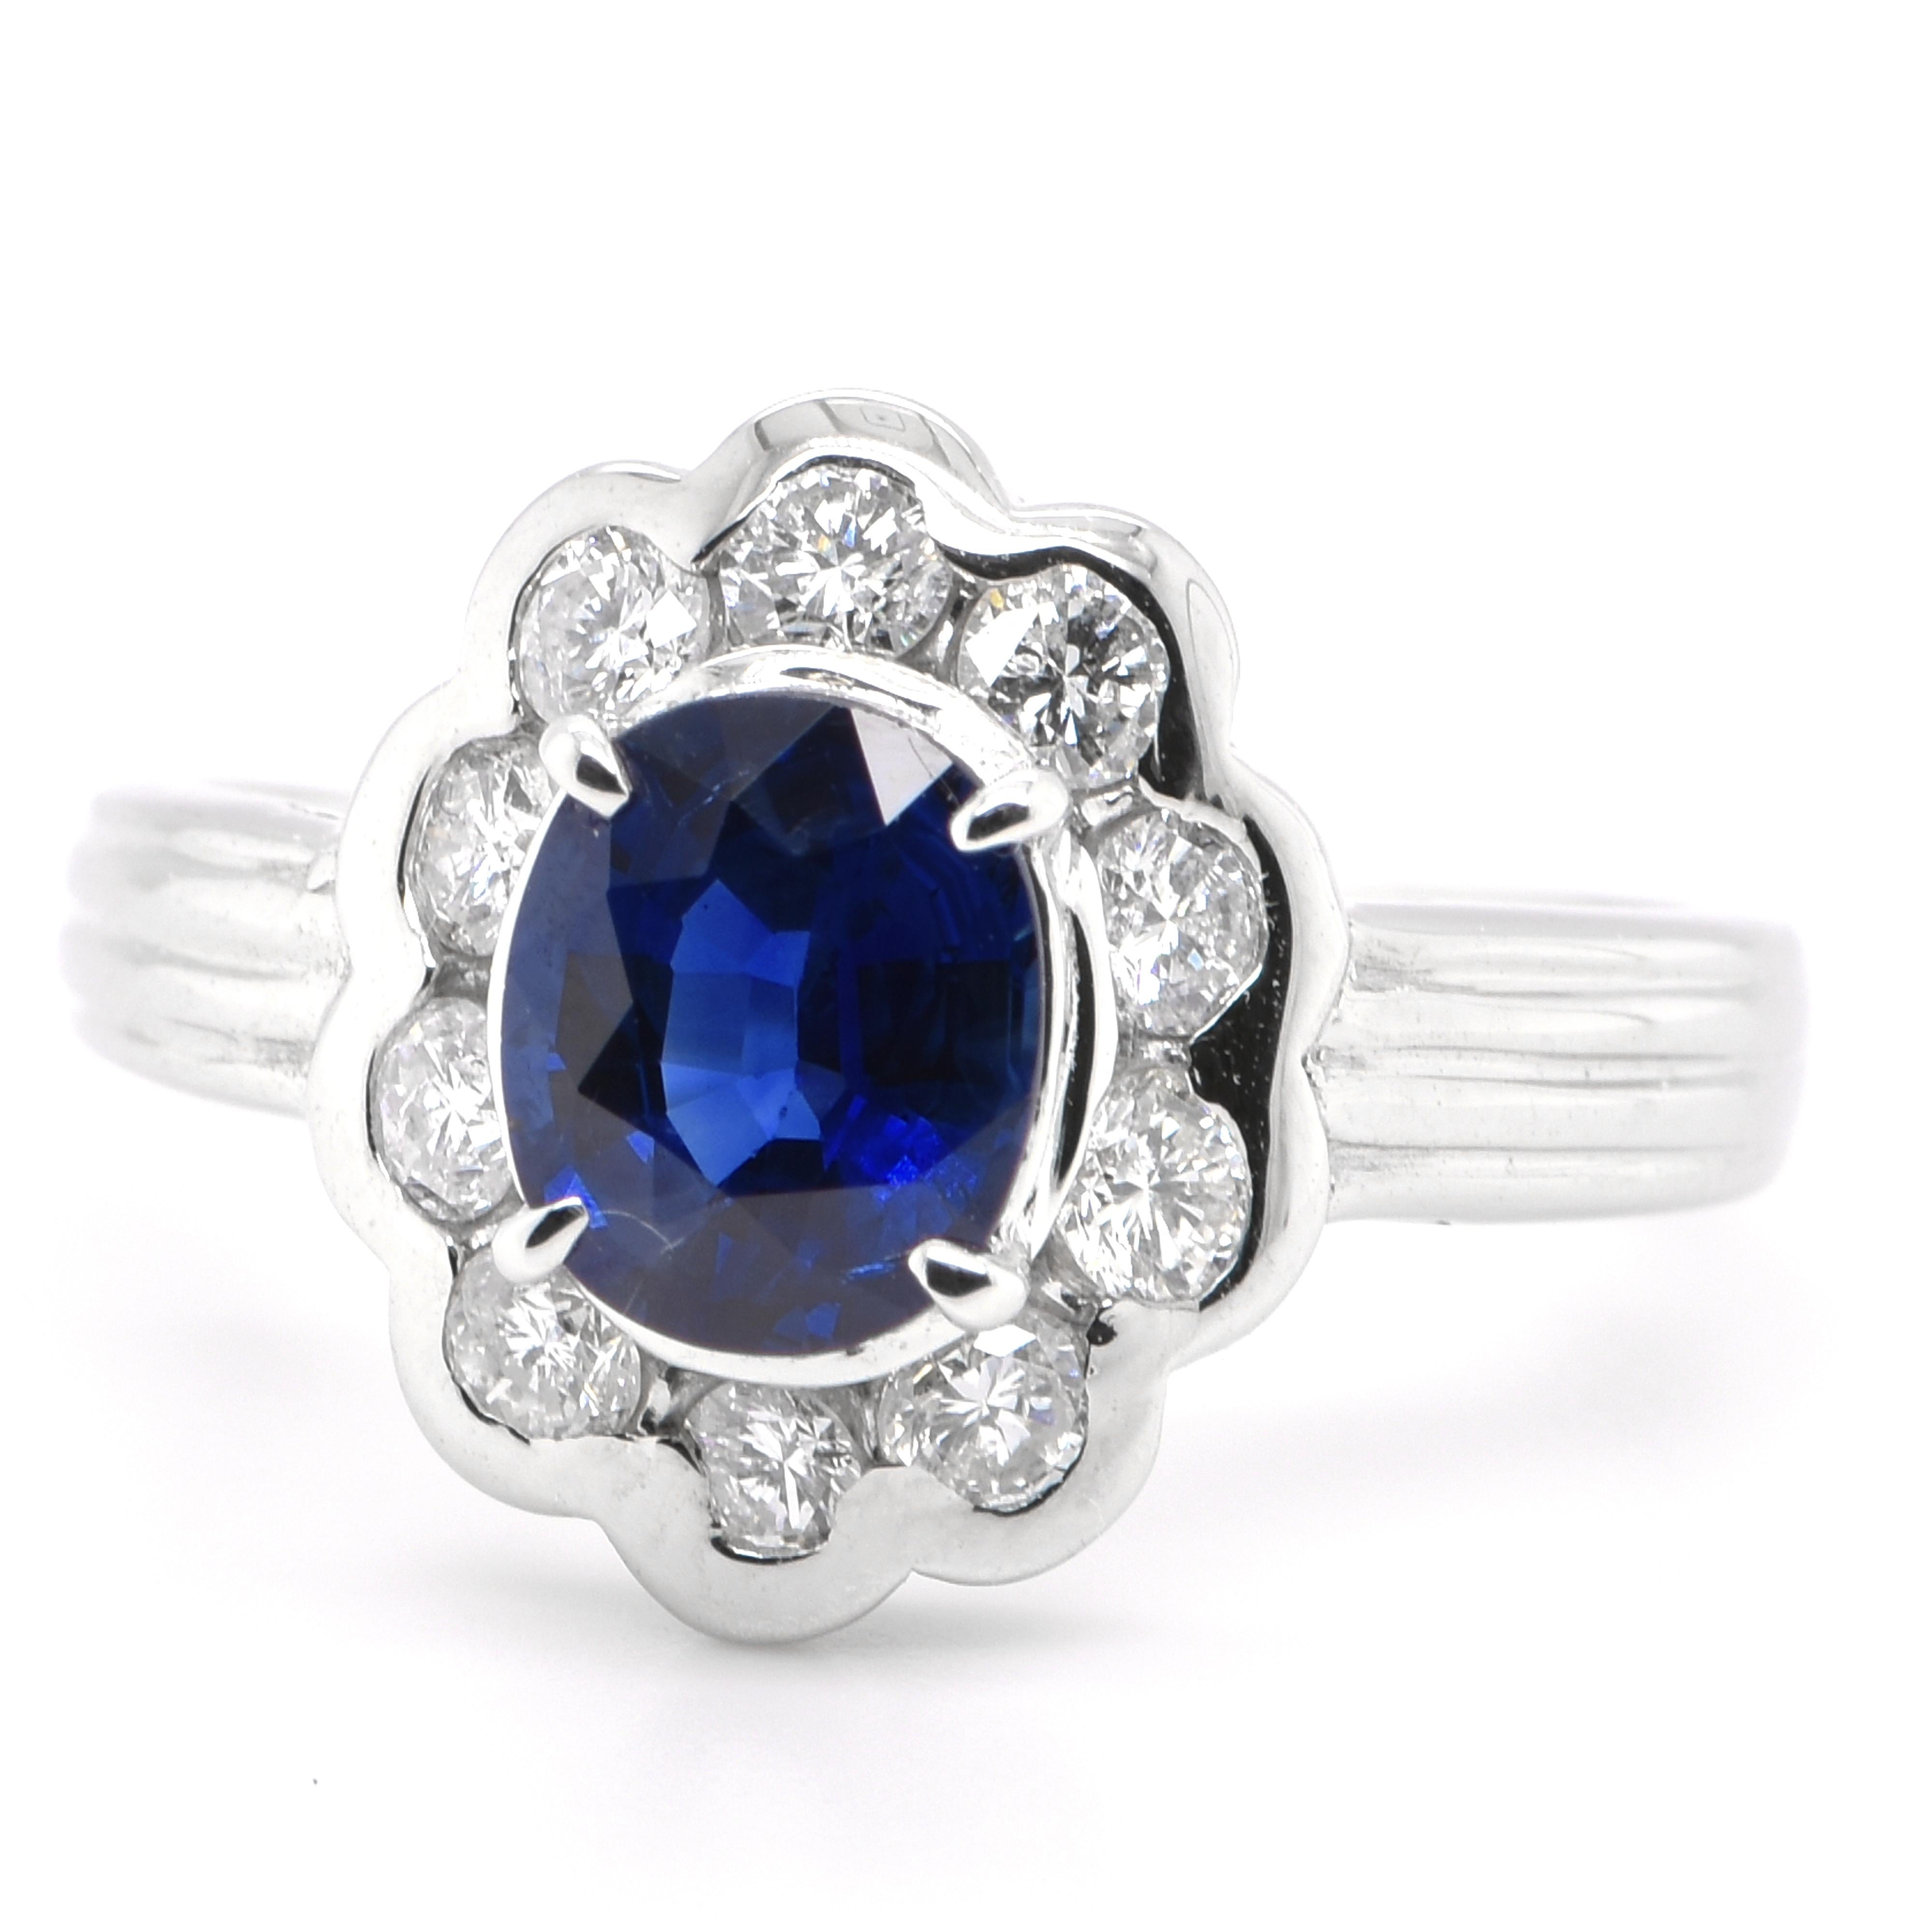 A beautiful Edwardian style ring featuring a 1.18 Carat Natural Blue Sapphire and 0.55 Carats Diamond Accents set in Platinum. Sapphires have extraordinary durability - they excel in hardness as well as toughness and durability making them very